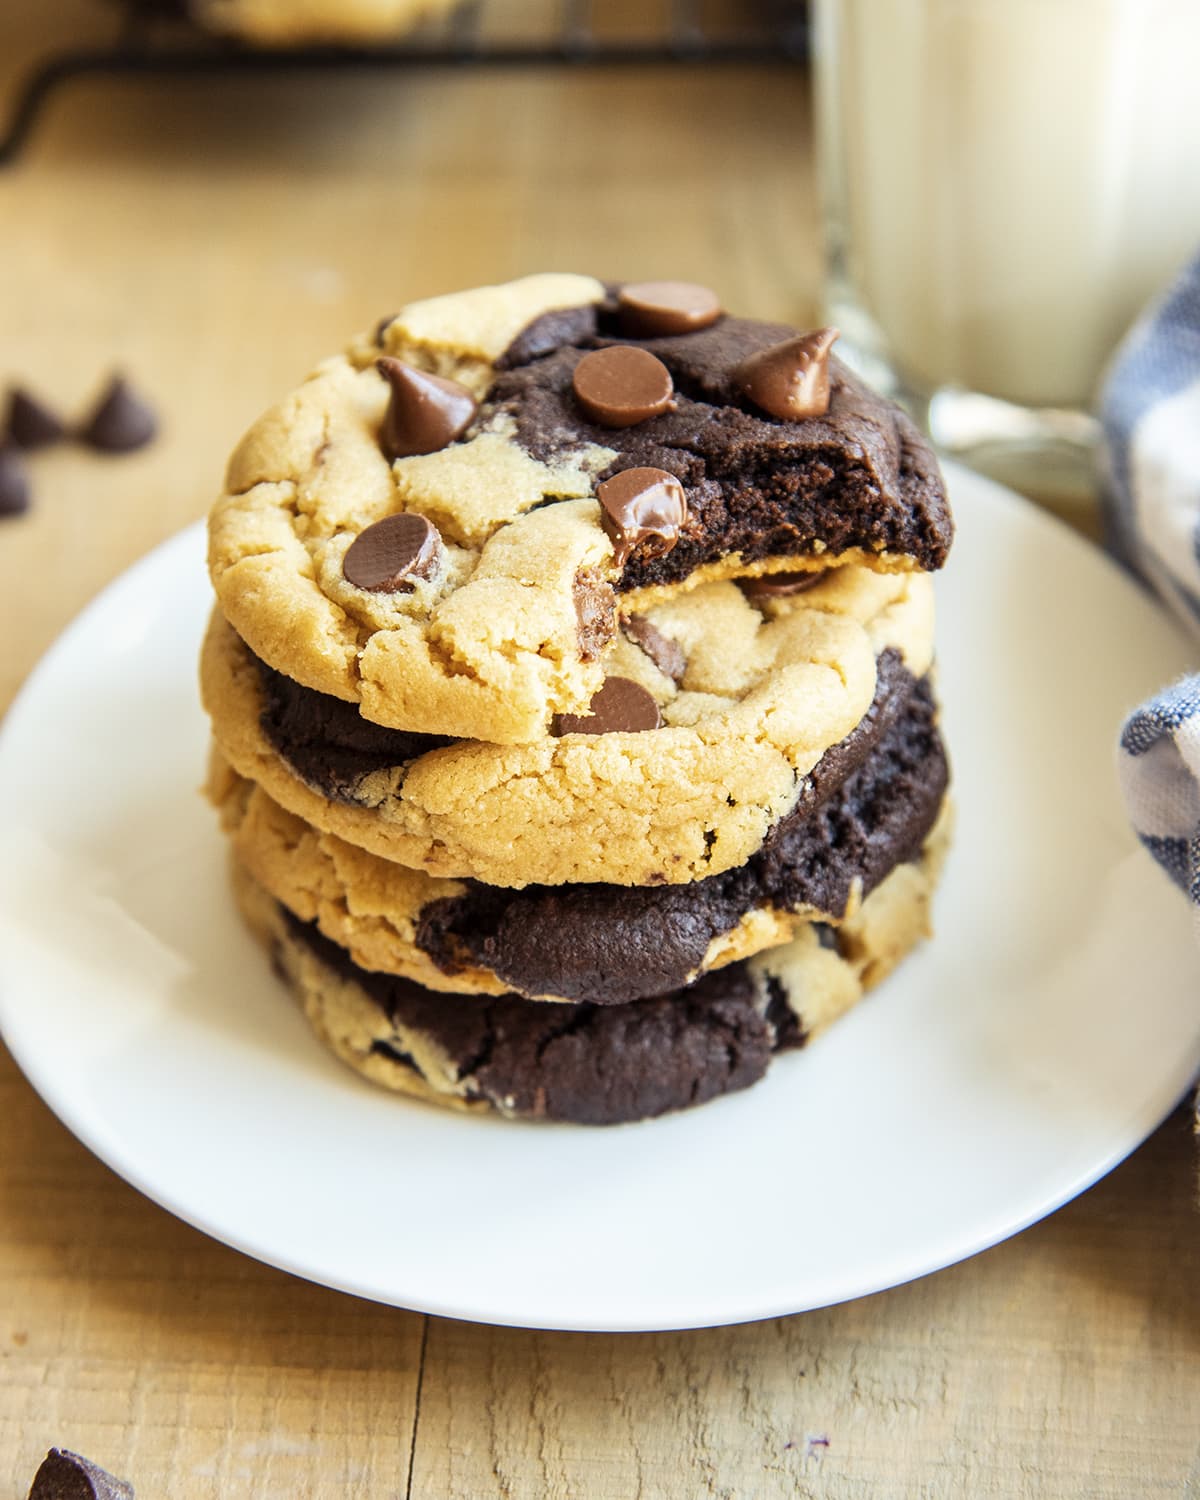 A stack of chocolate peanut butter marbled cookies on a plate, and the top cookie has a bite out of it.